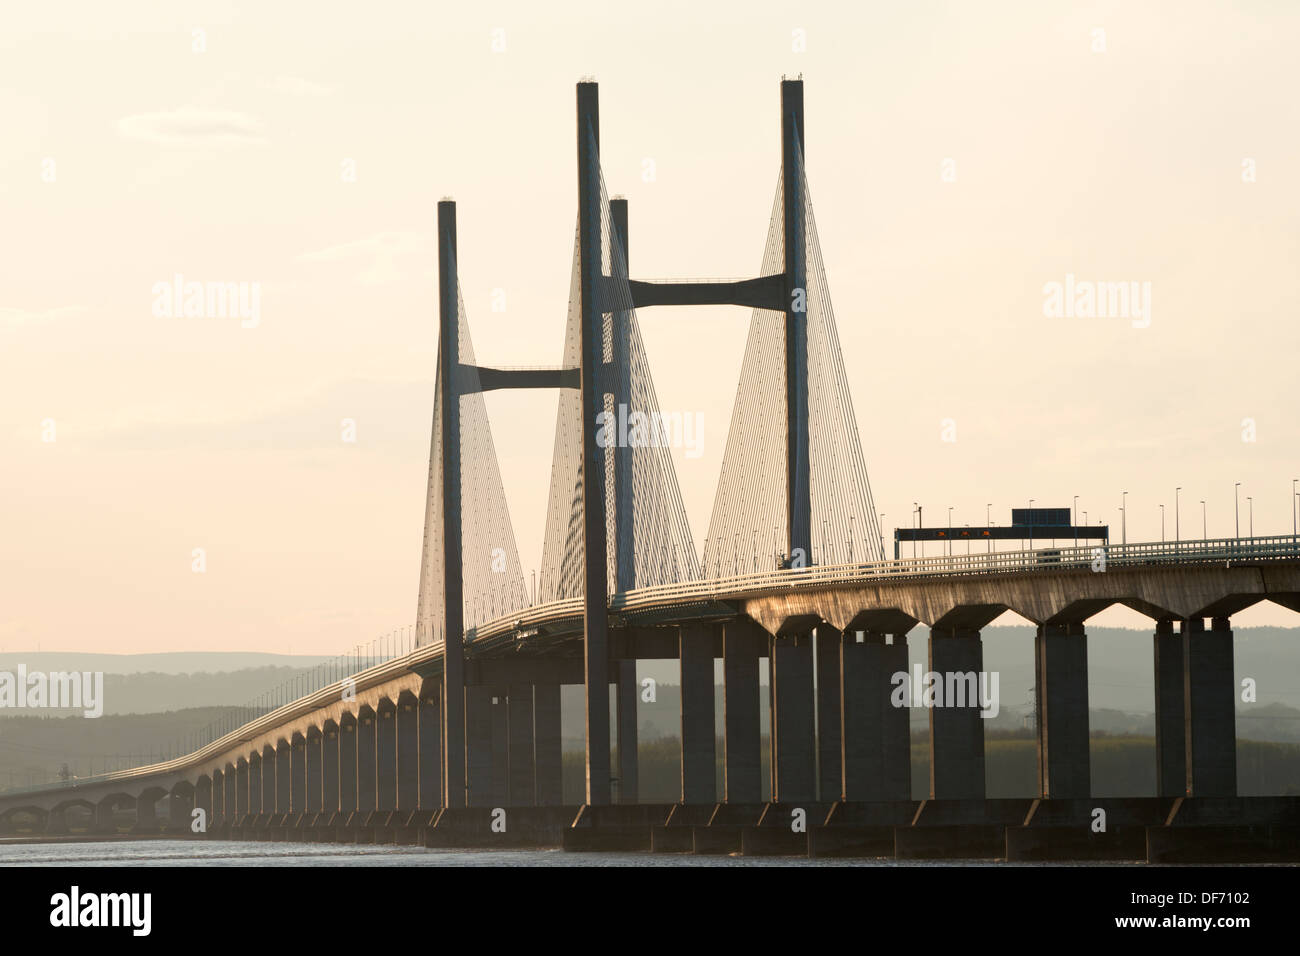 The Second Severn Crossing, carrying the M4 motorway, linking England and Wales. Stock Photo